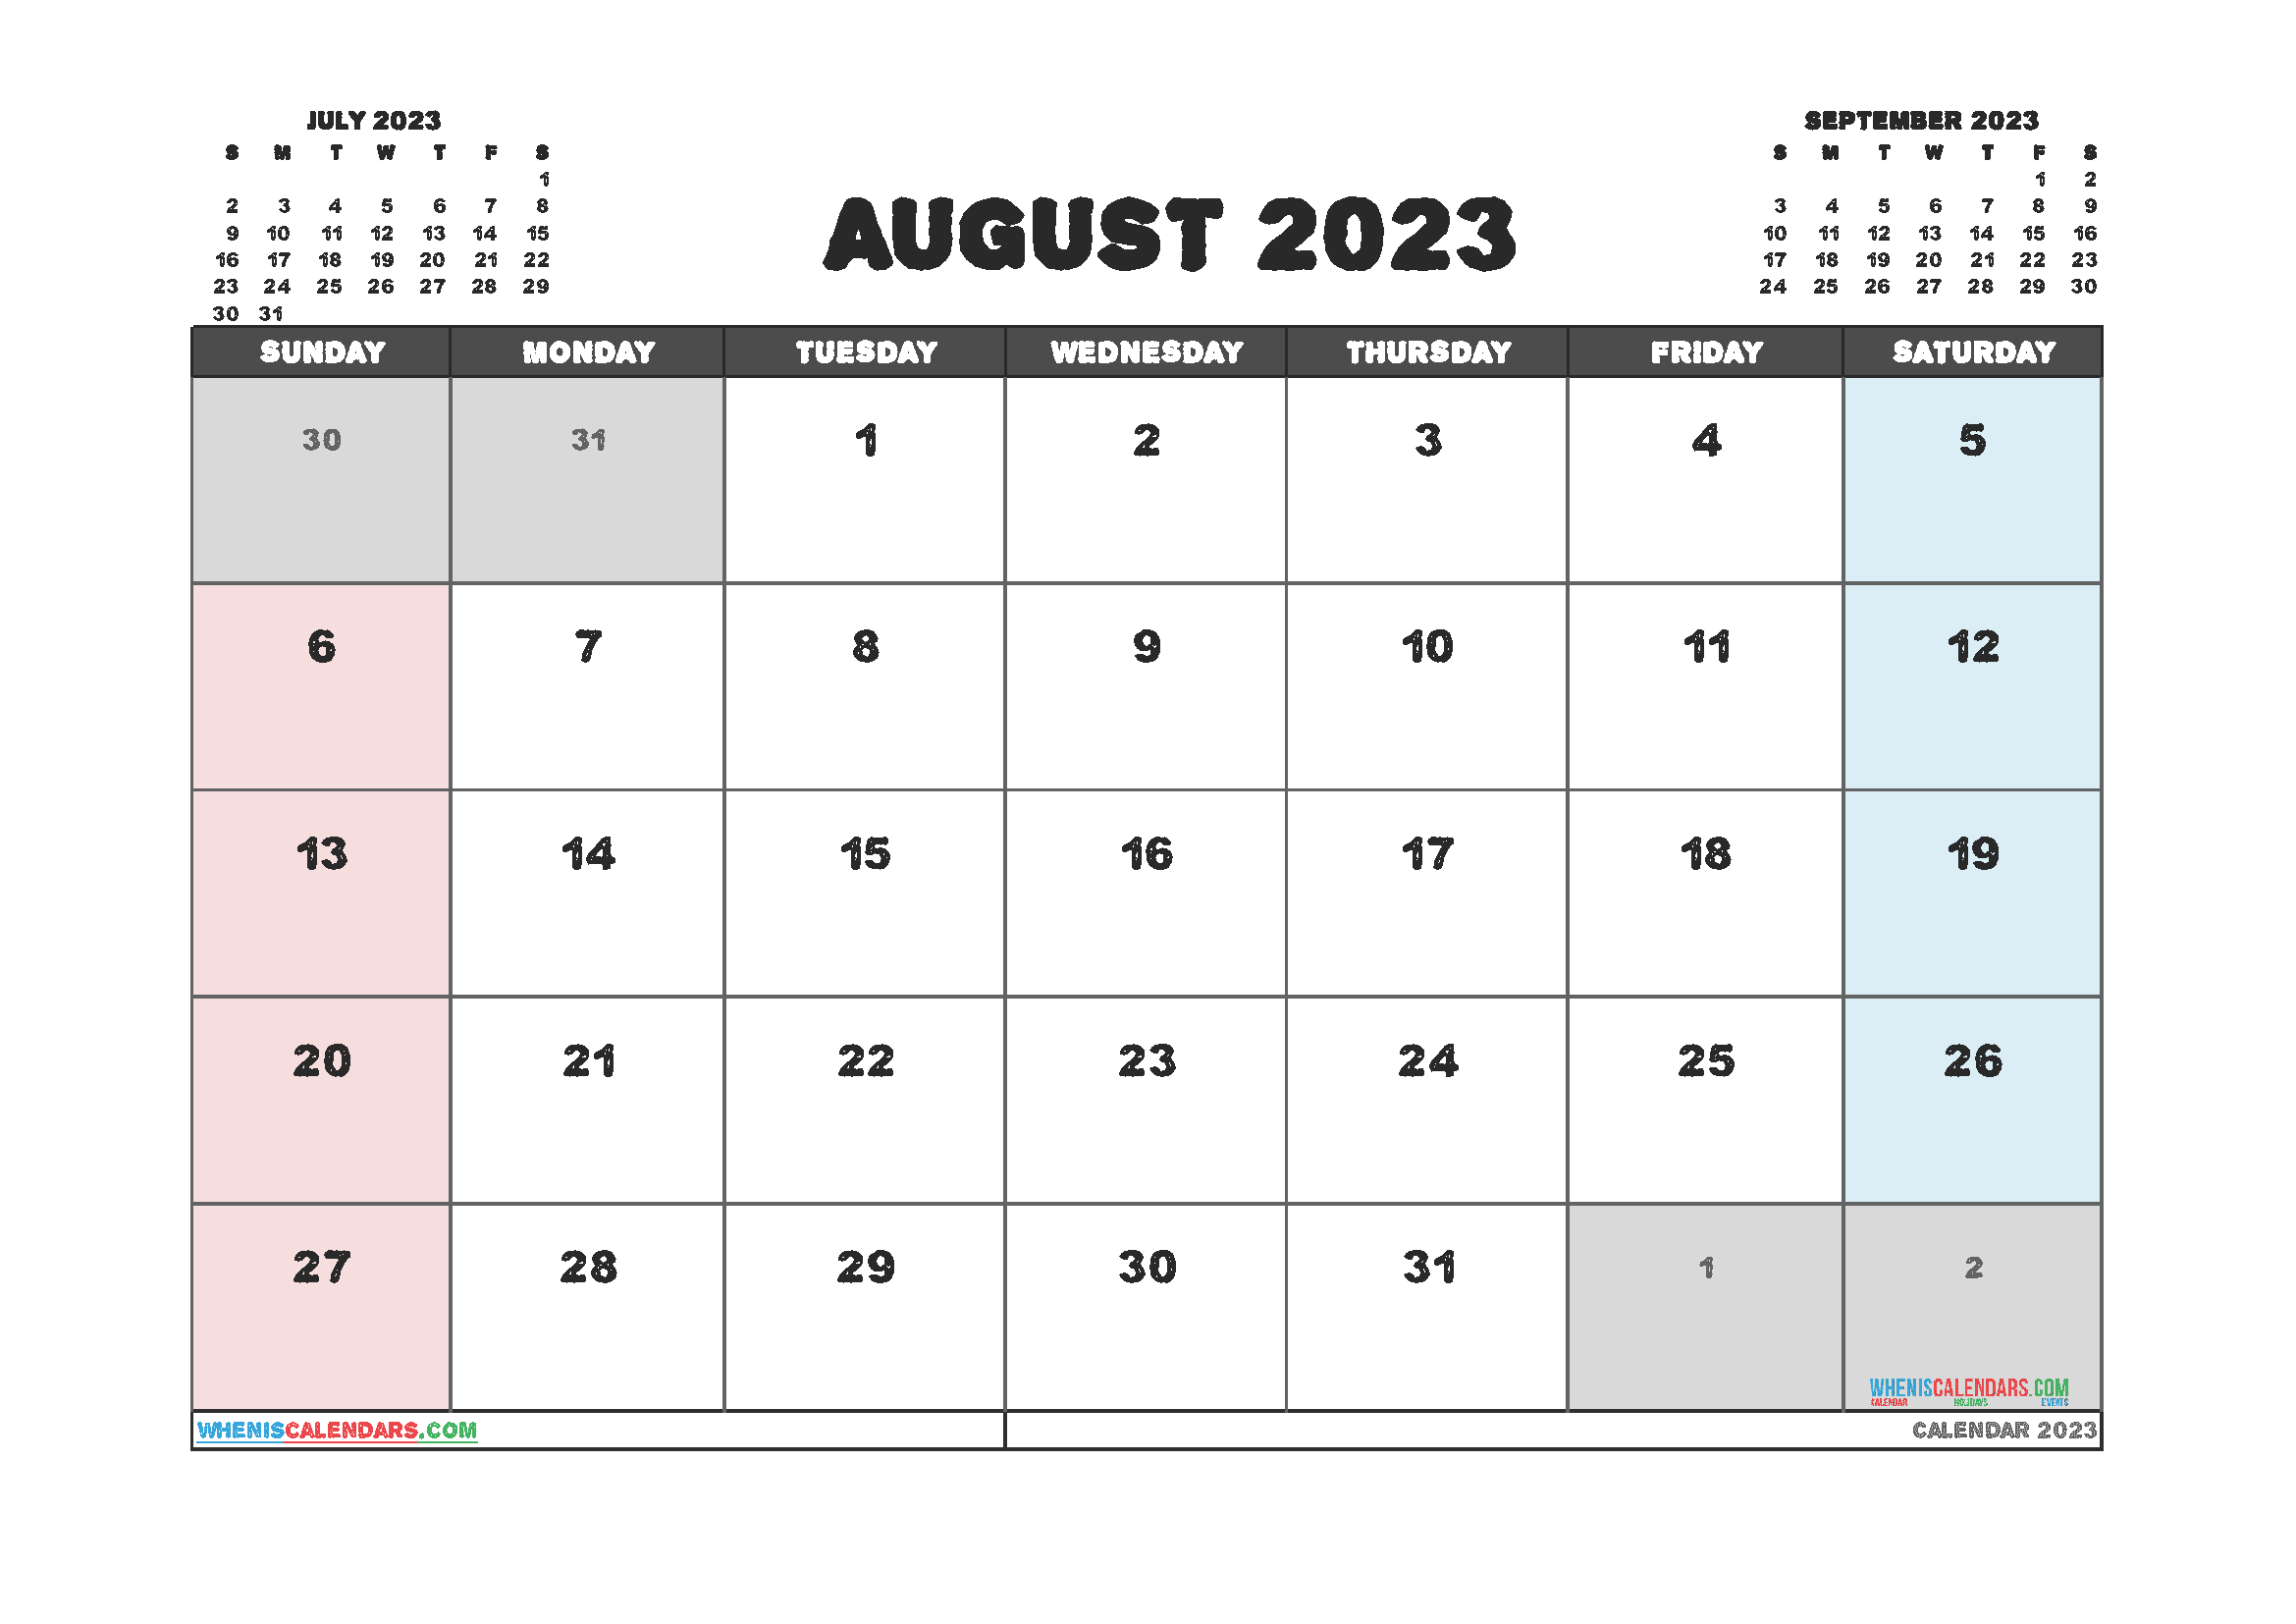 Free Calendar August 2023 with Holidays Printable PDF in Landscape